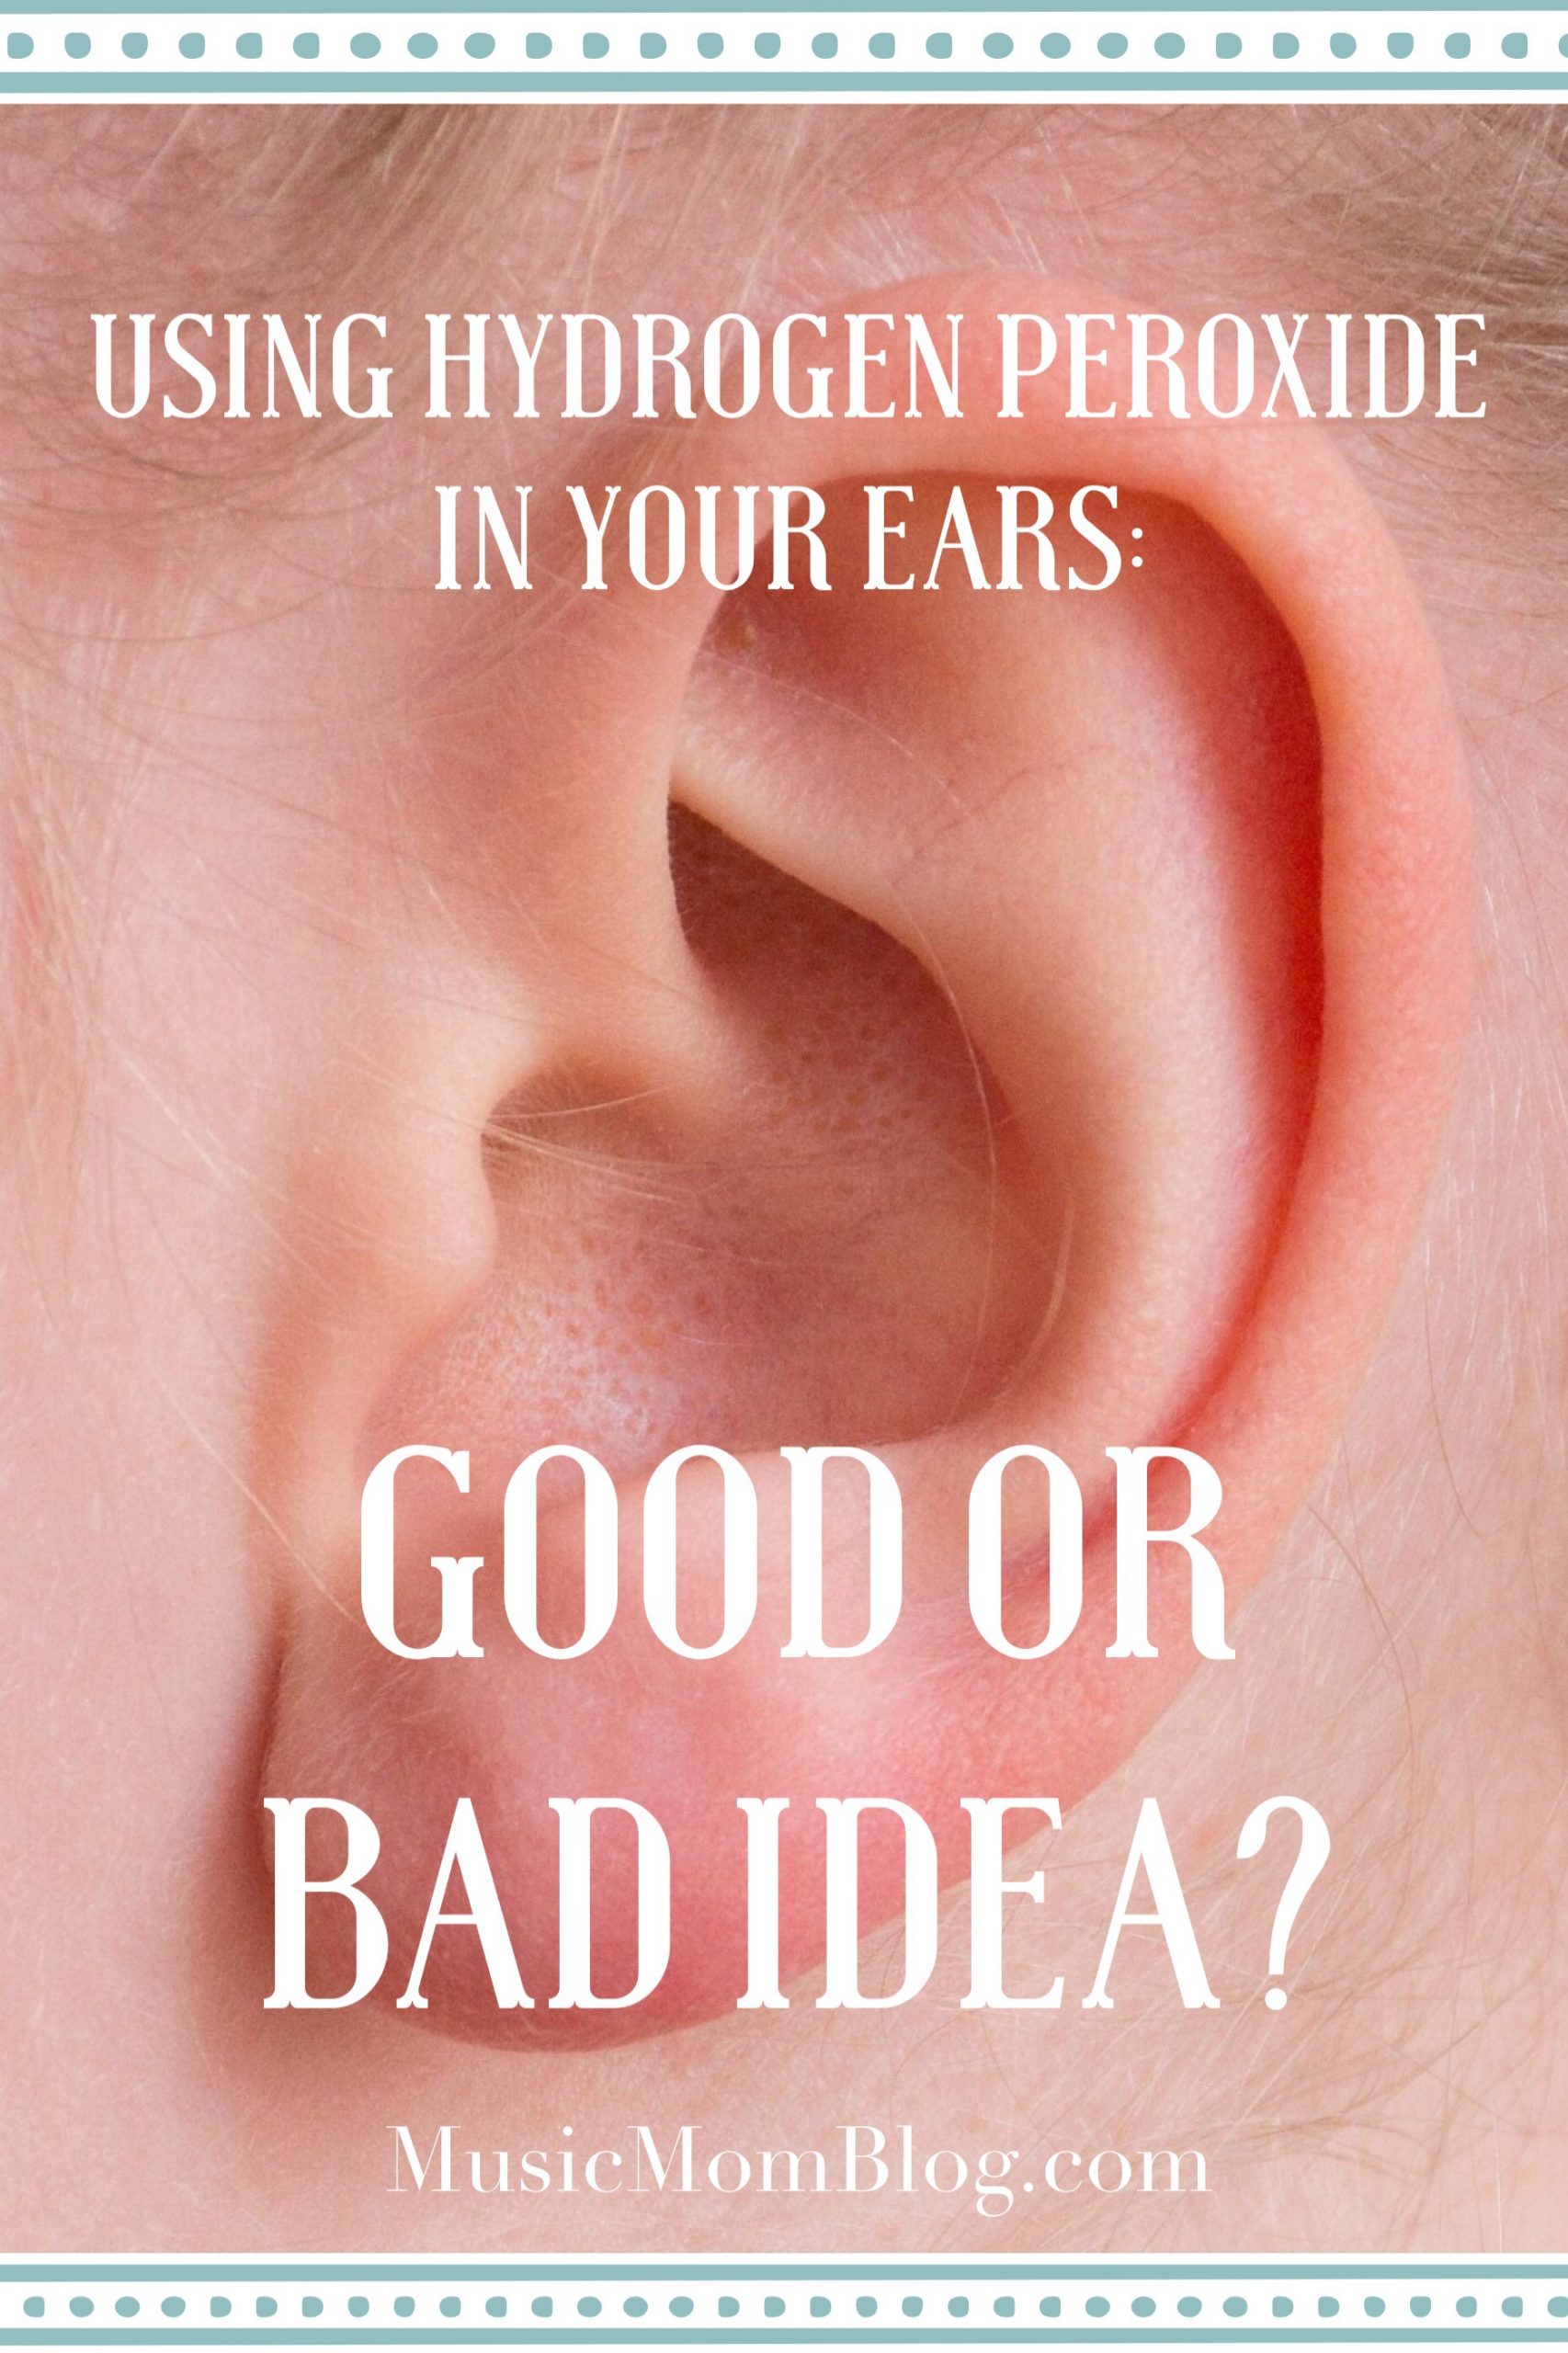 Can peroxide help ear infection